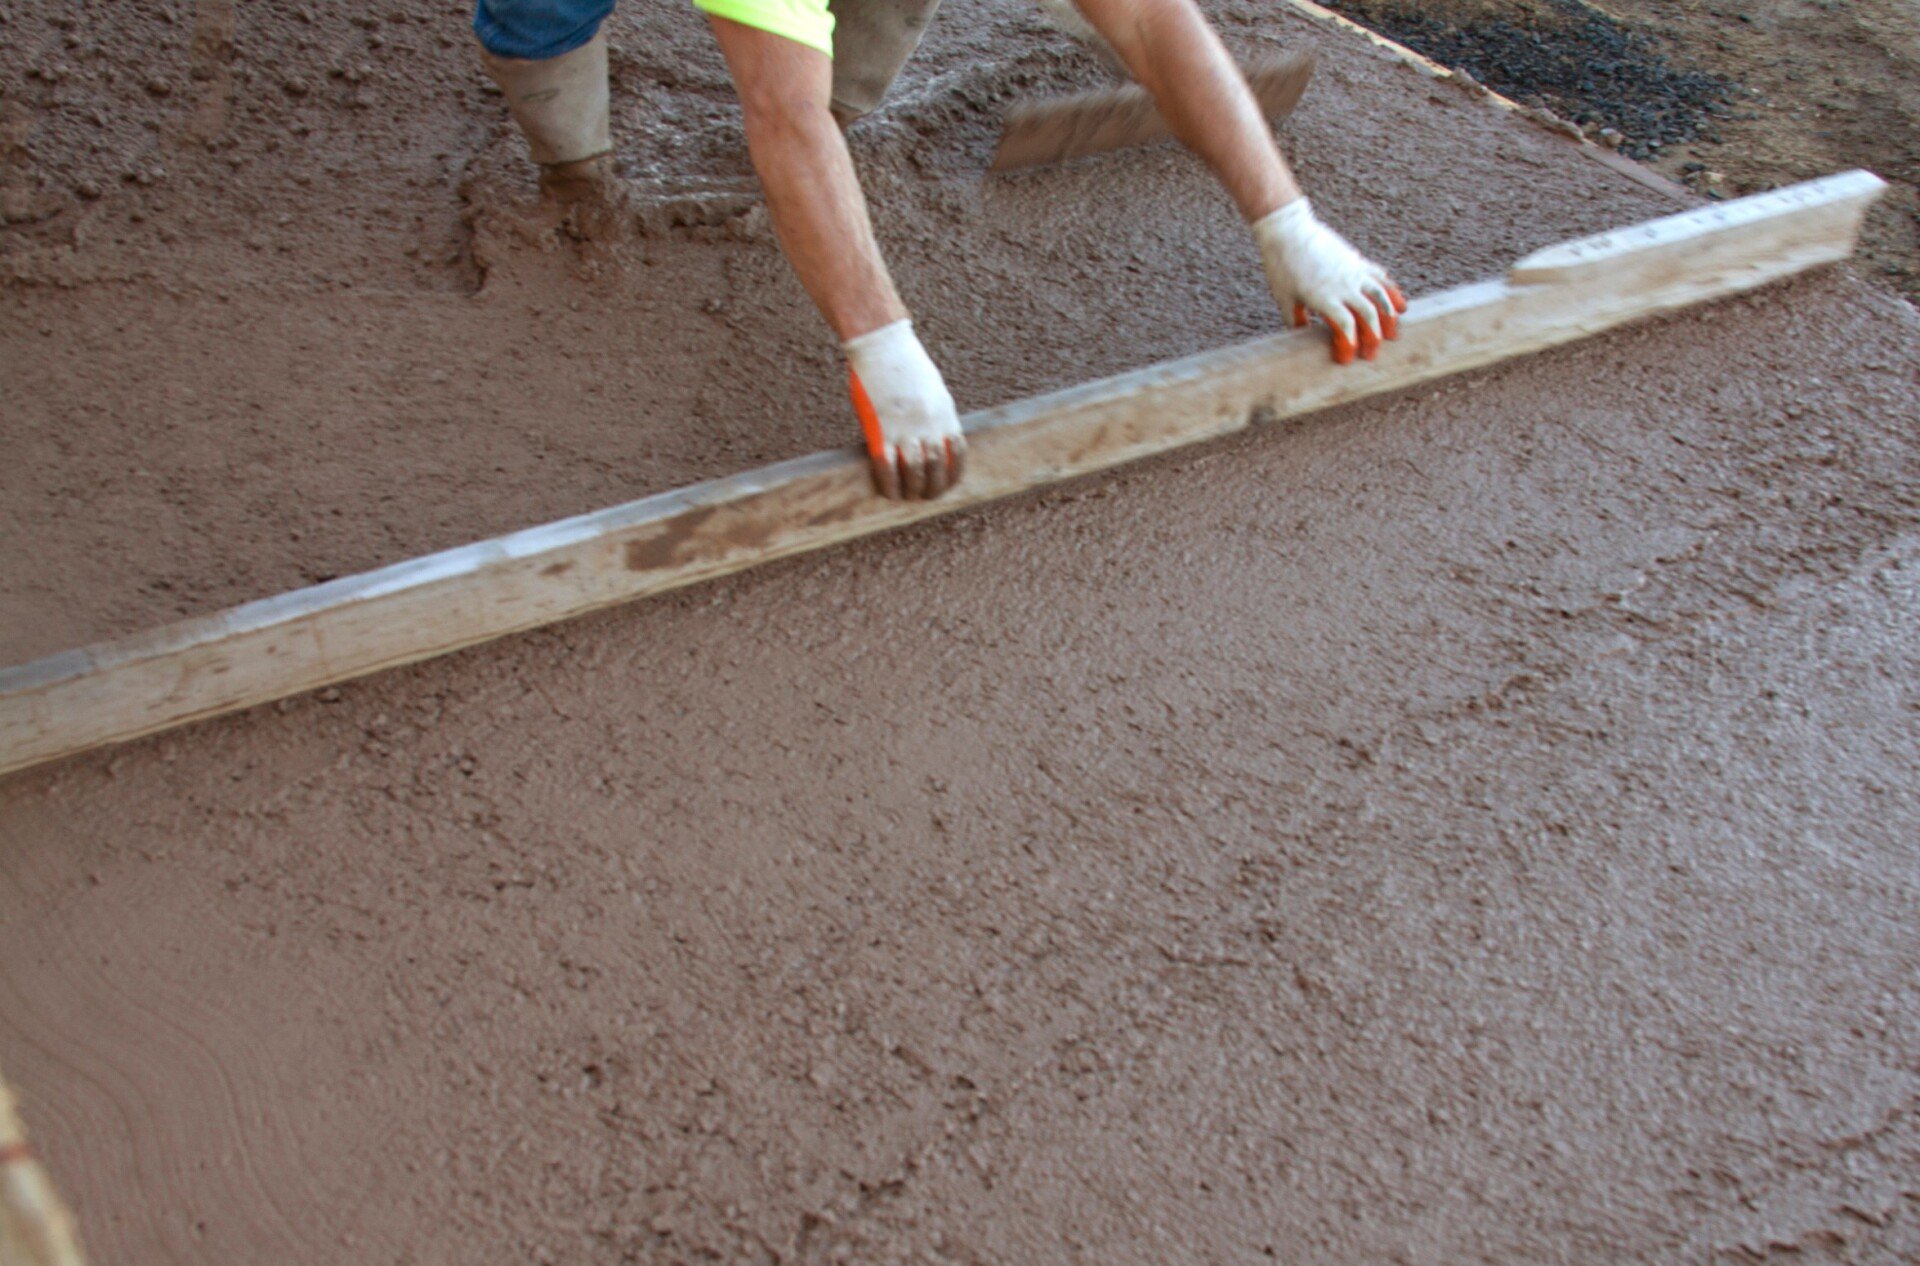 A person wearing gloves and boots is using a long wooden or metal tool to smooth and level a freshly poured Palm Beach stamped concrete surface. The concrete appears wet and is being spread evenly. The person, partially visible, focuses on the precise details of stamped concrete installation.